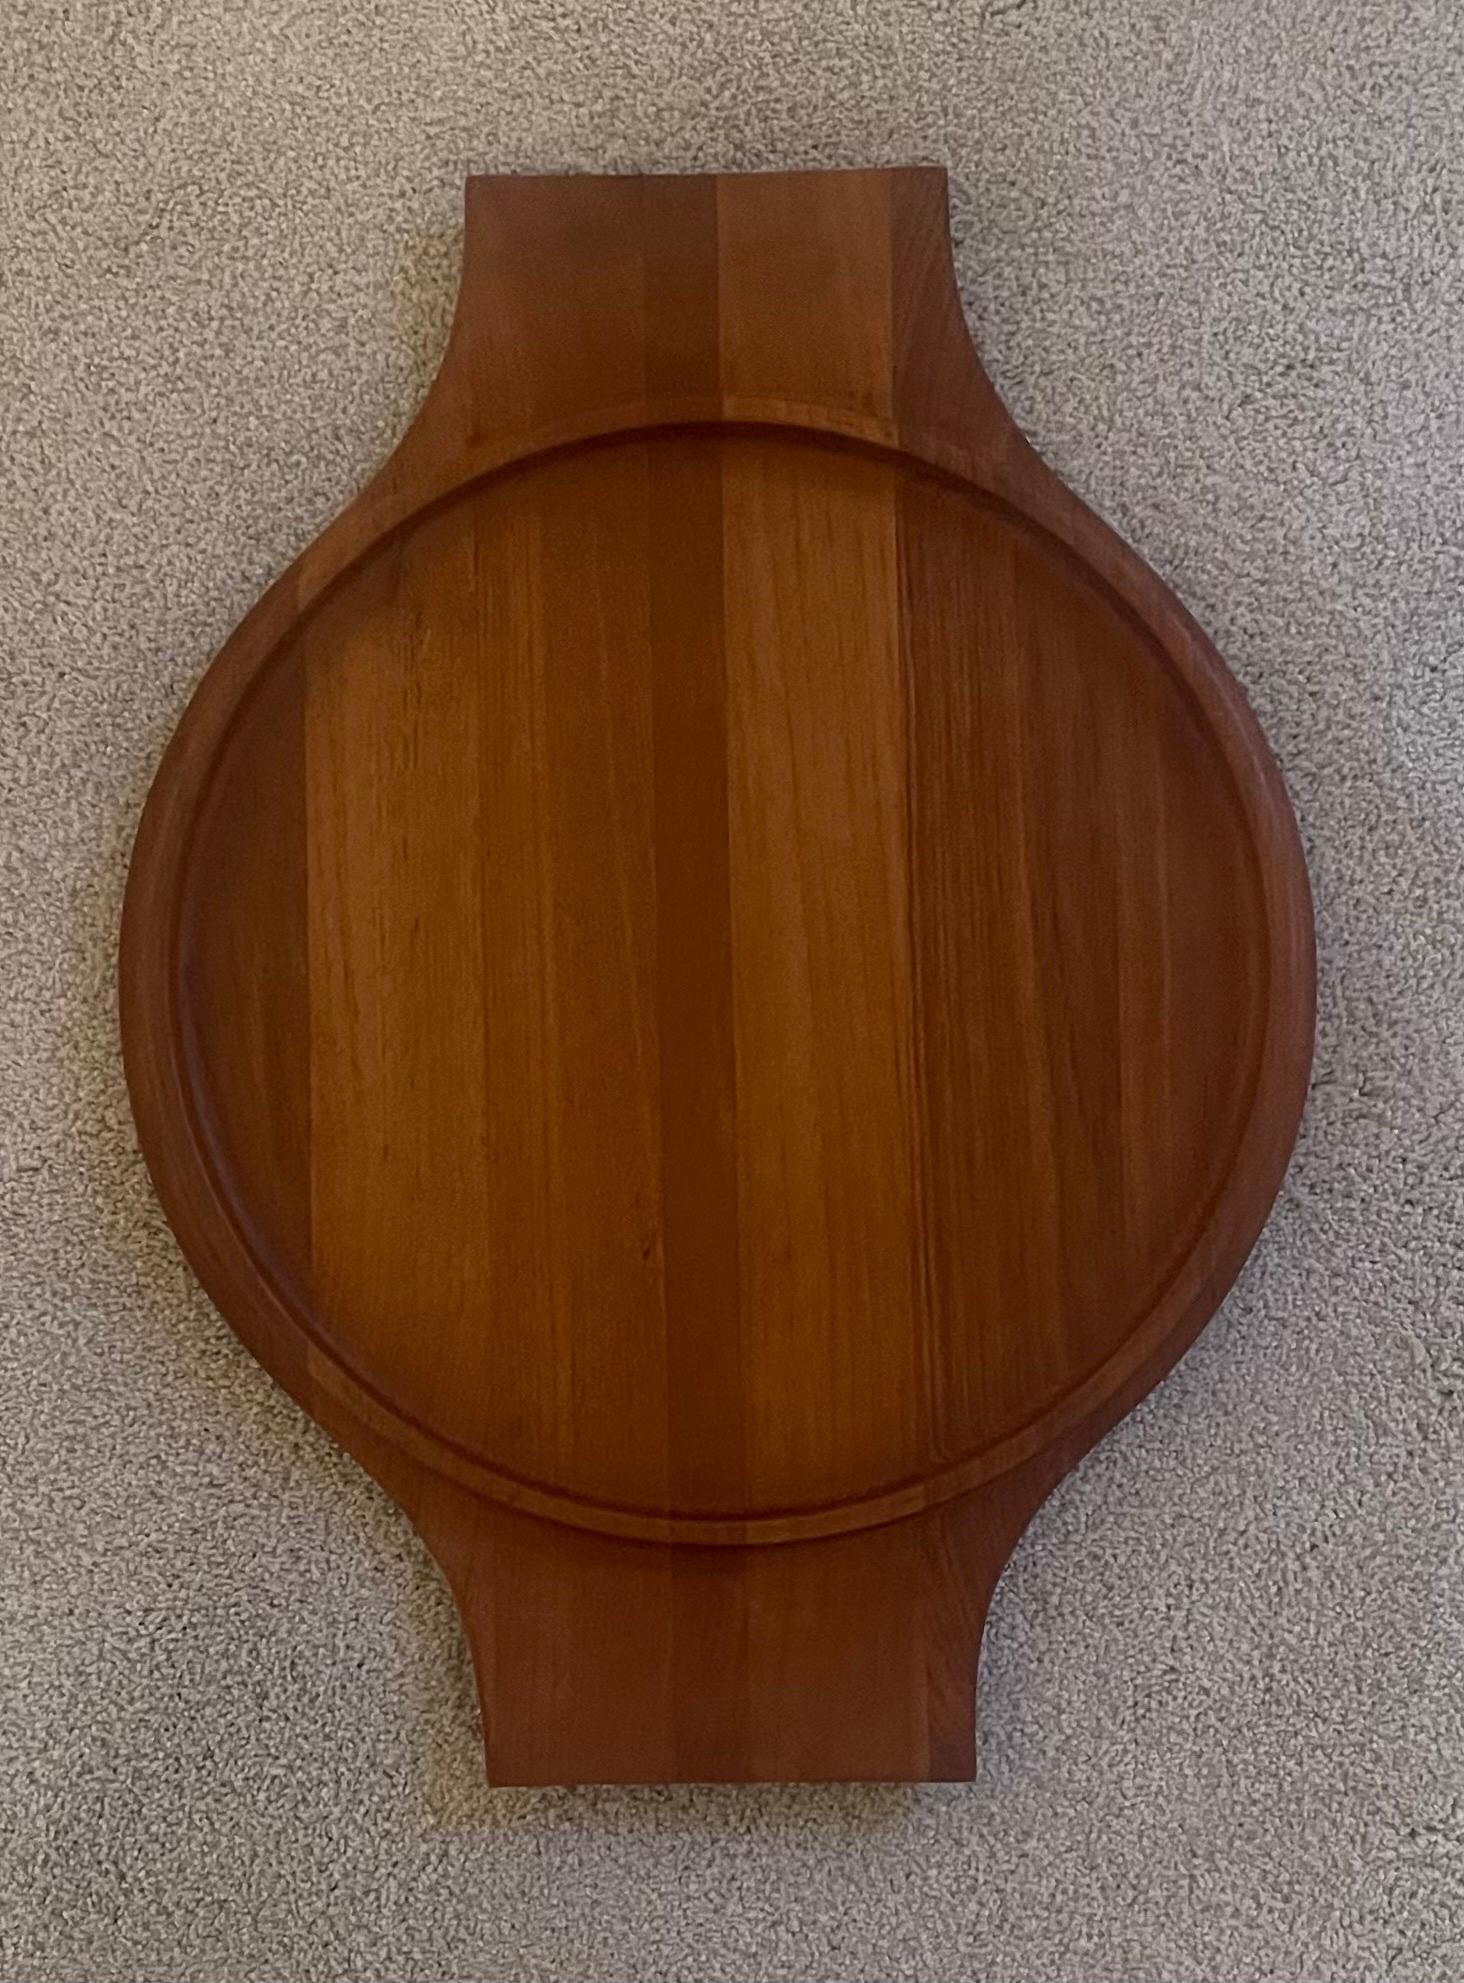 A very hard to find Danish modern teak handled serving tray by Jens Quistgaard for Dansk, circa 1960s. The piece is in very good vintage condition and measures 21.5